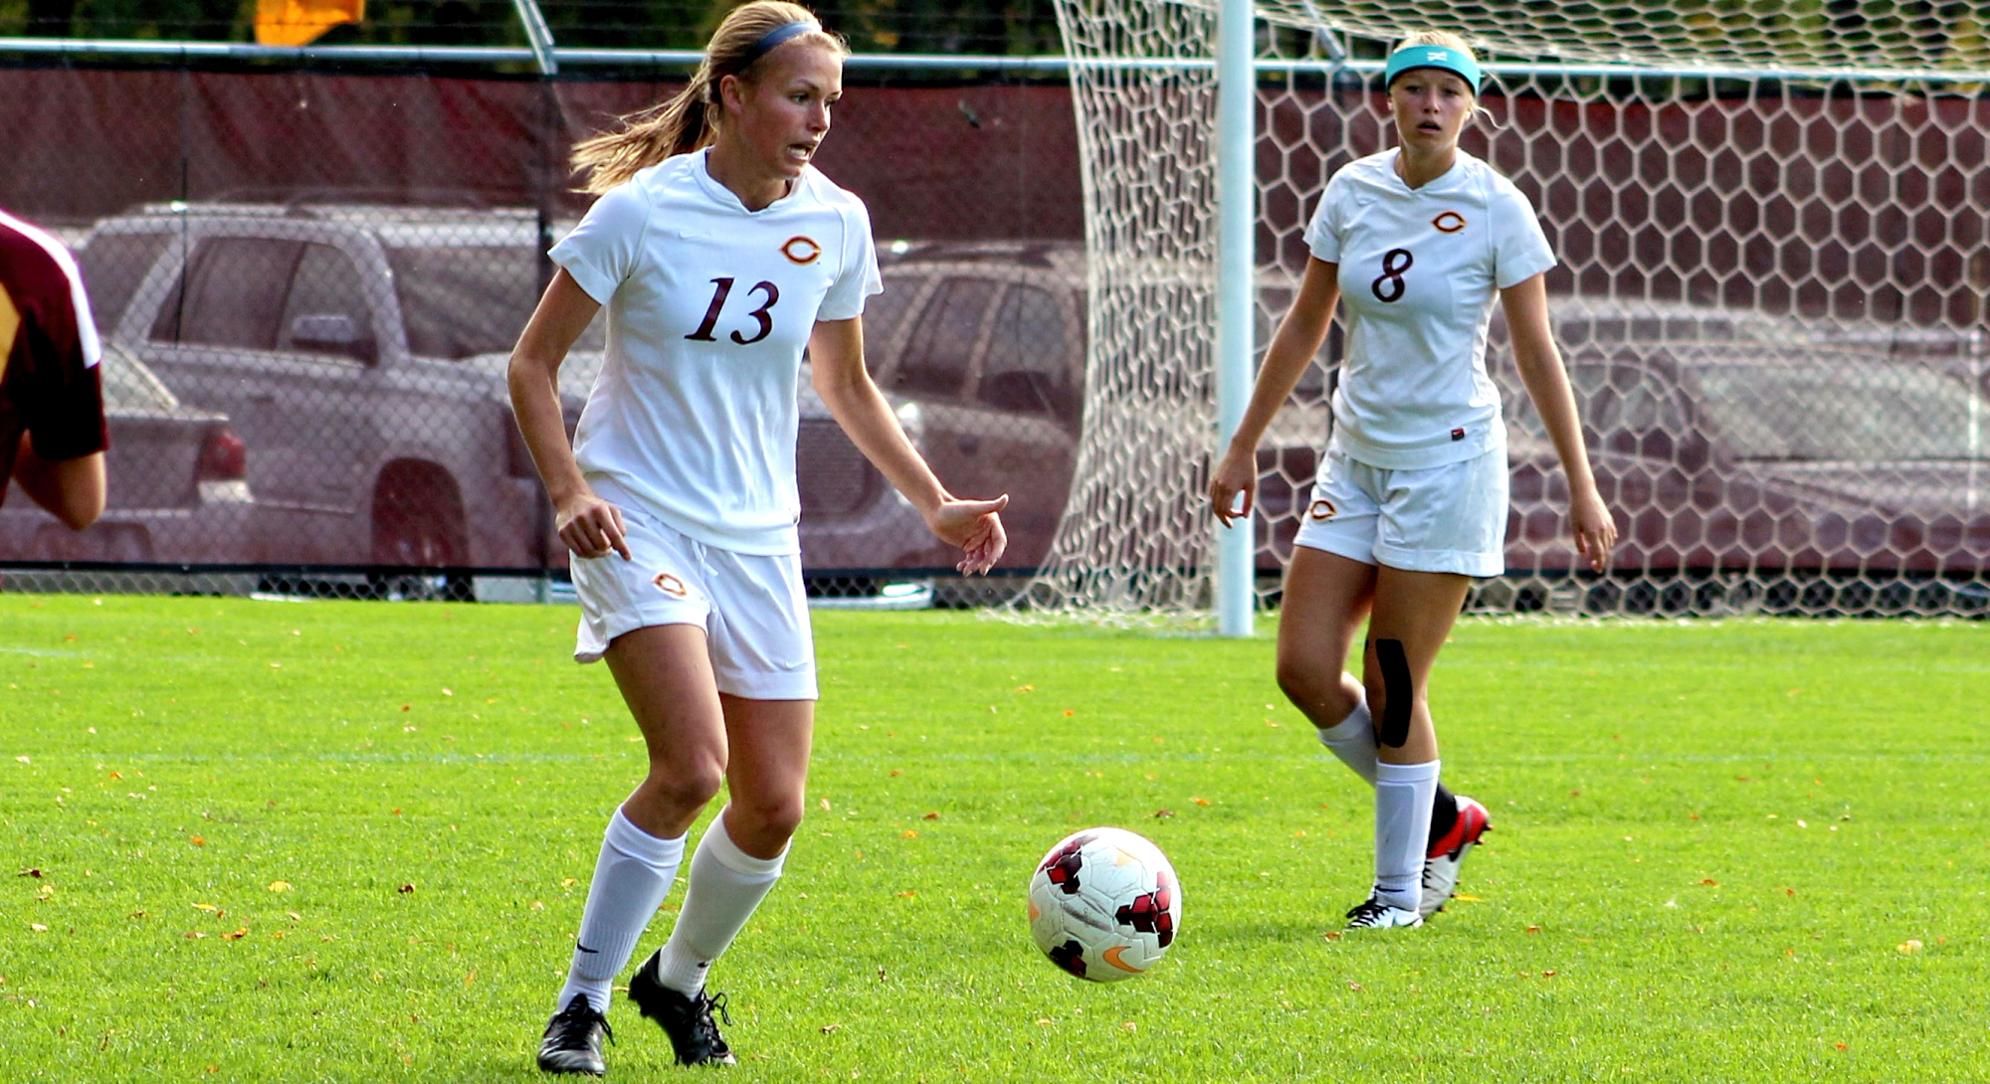 Senior defender Carly Mickelson scored her first collegiate goal in the Cobbers' 2-1 loss at St. Olaf.